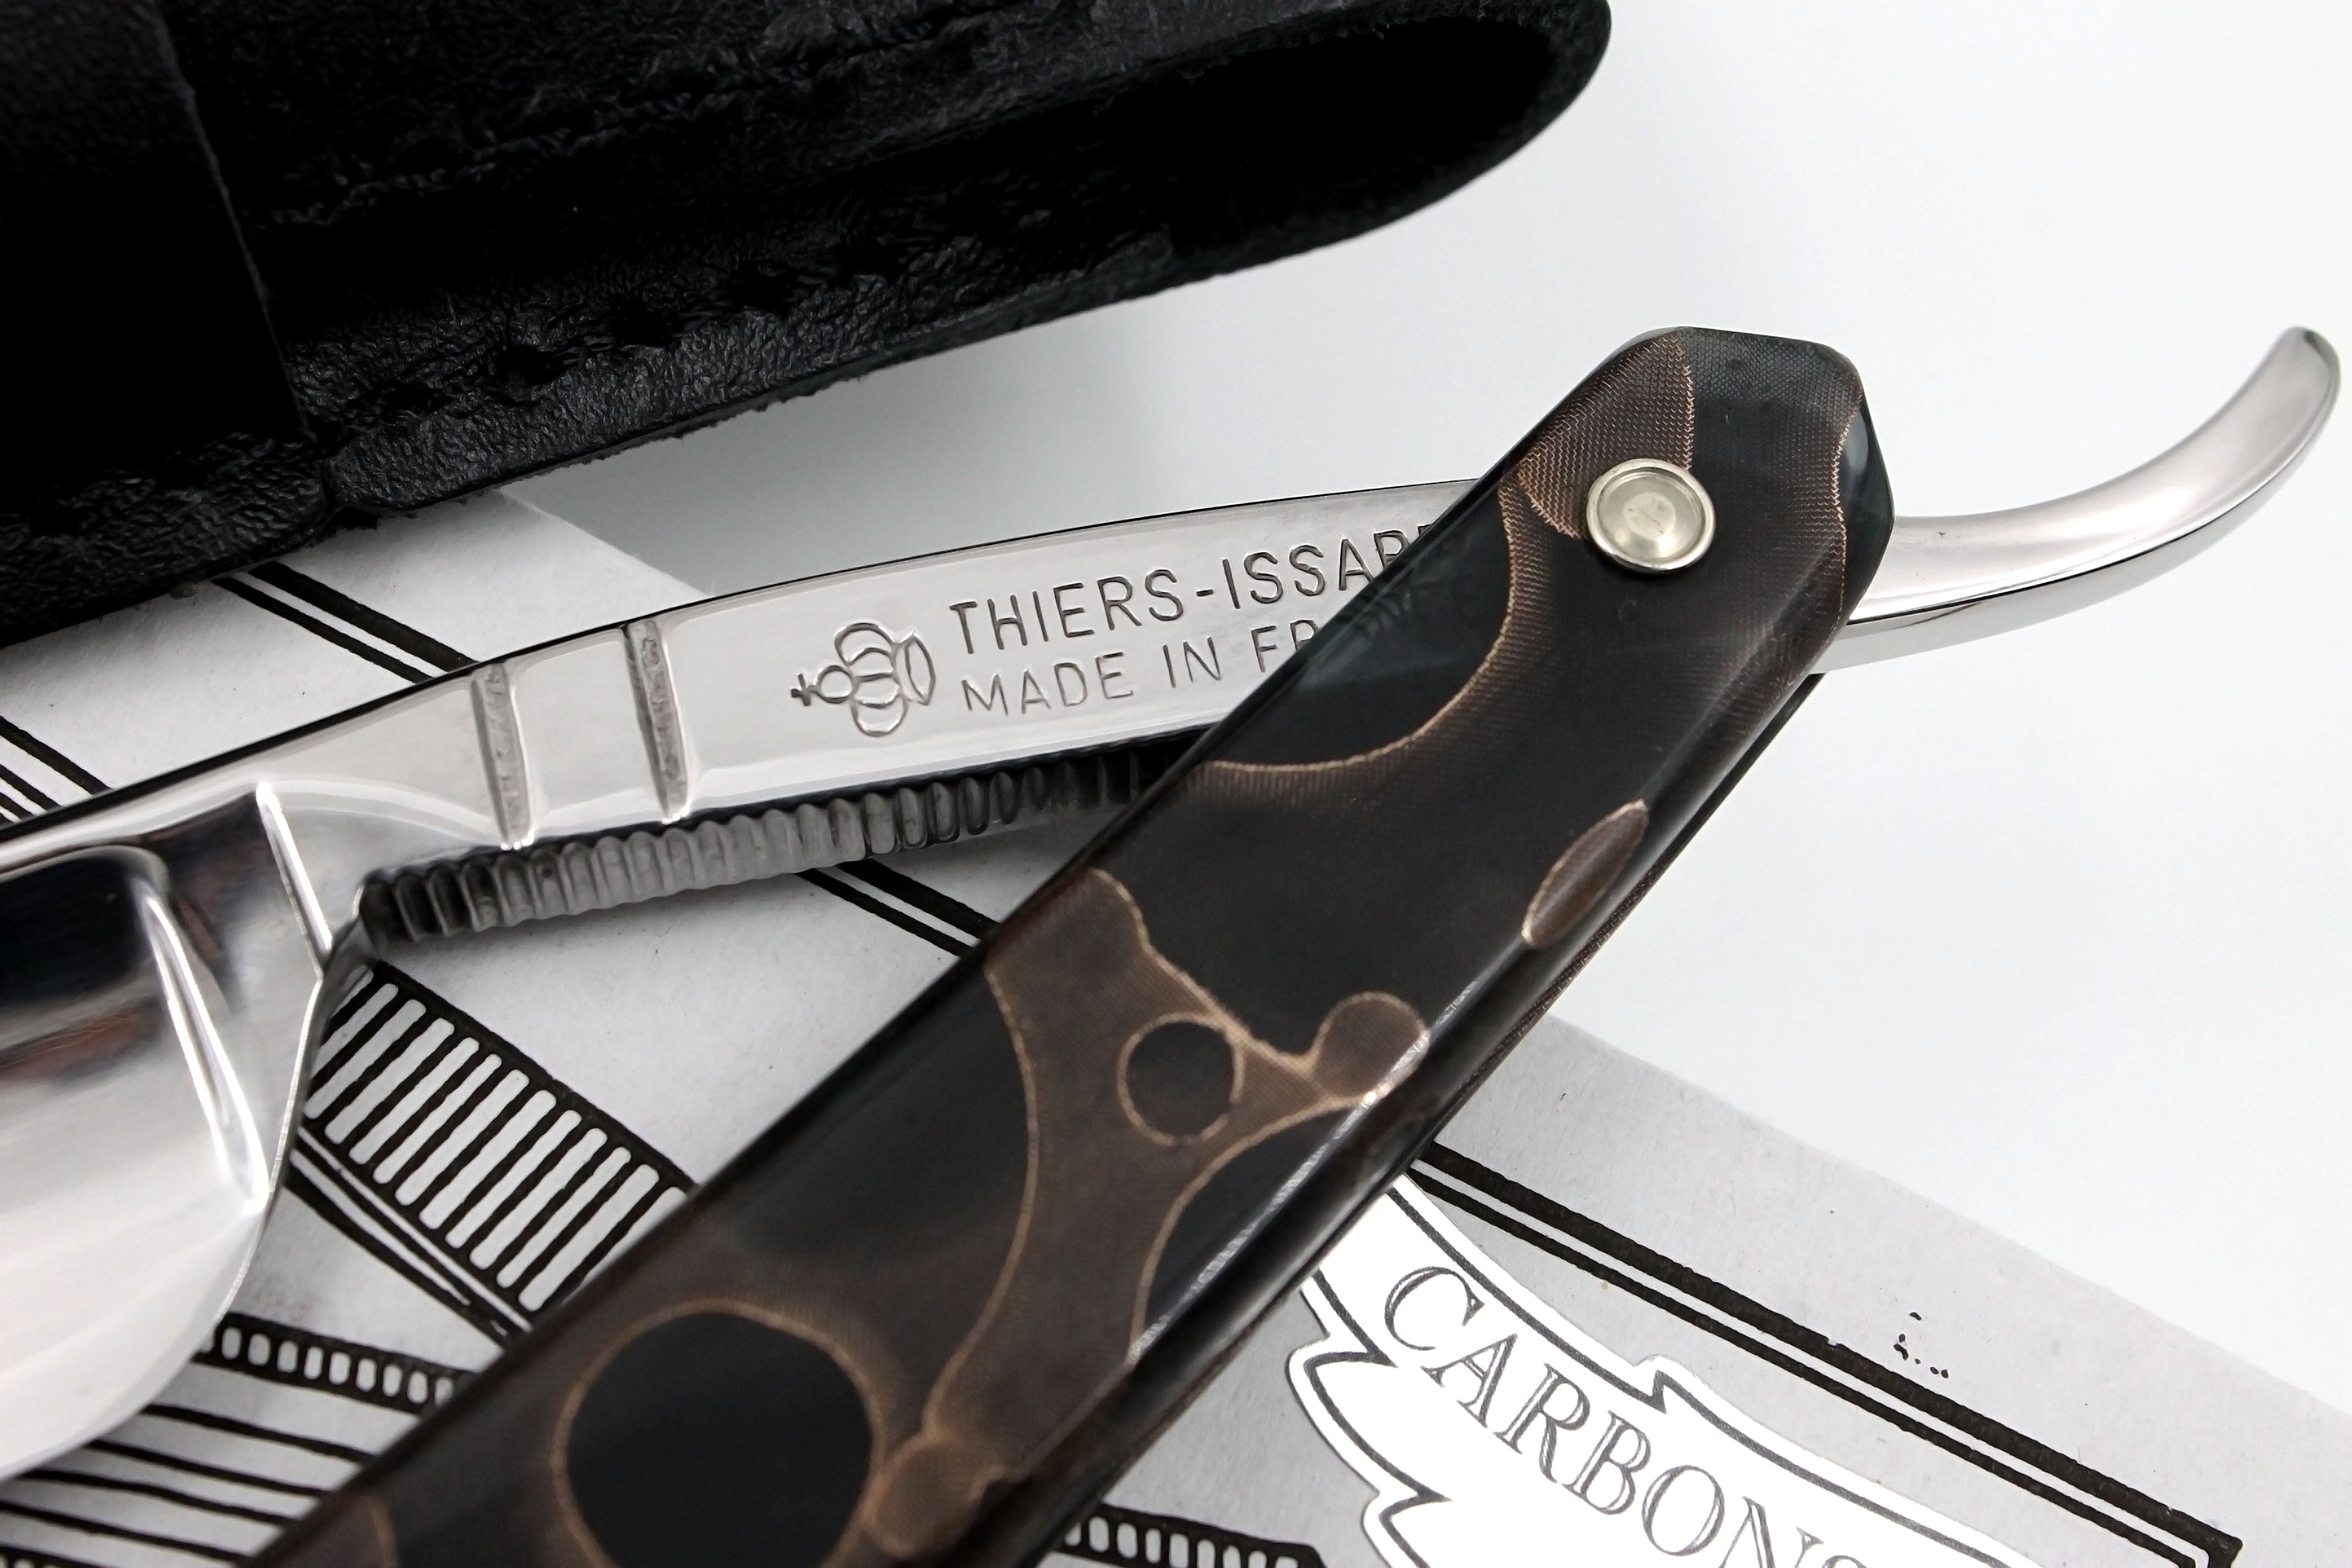 Thiers Issard 6/8 "Roi Soleil" Etch - Composite Moon Scales - Full Hollow Straight Razor